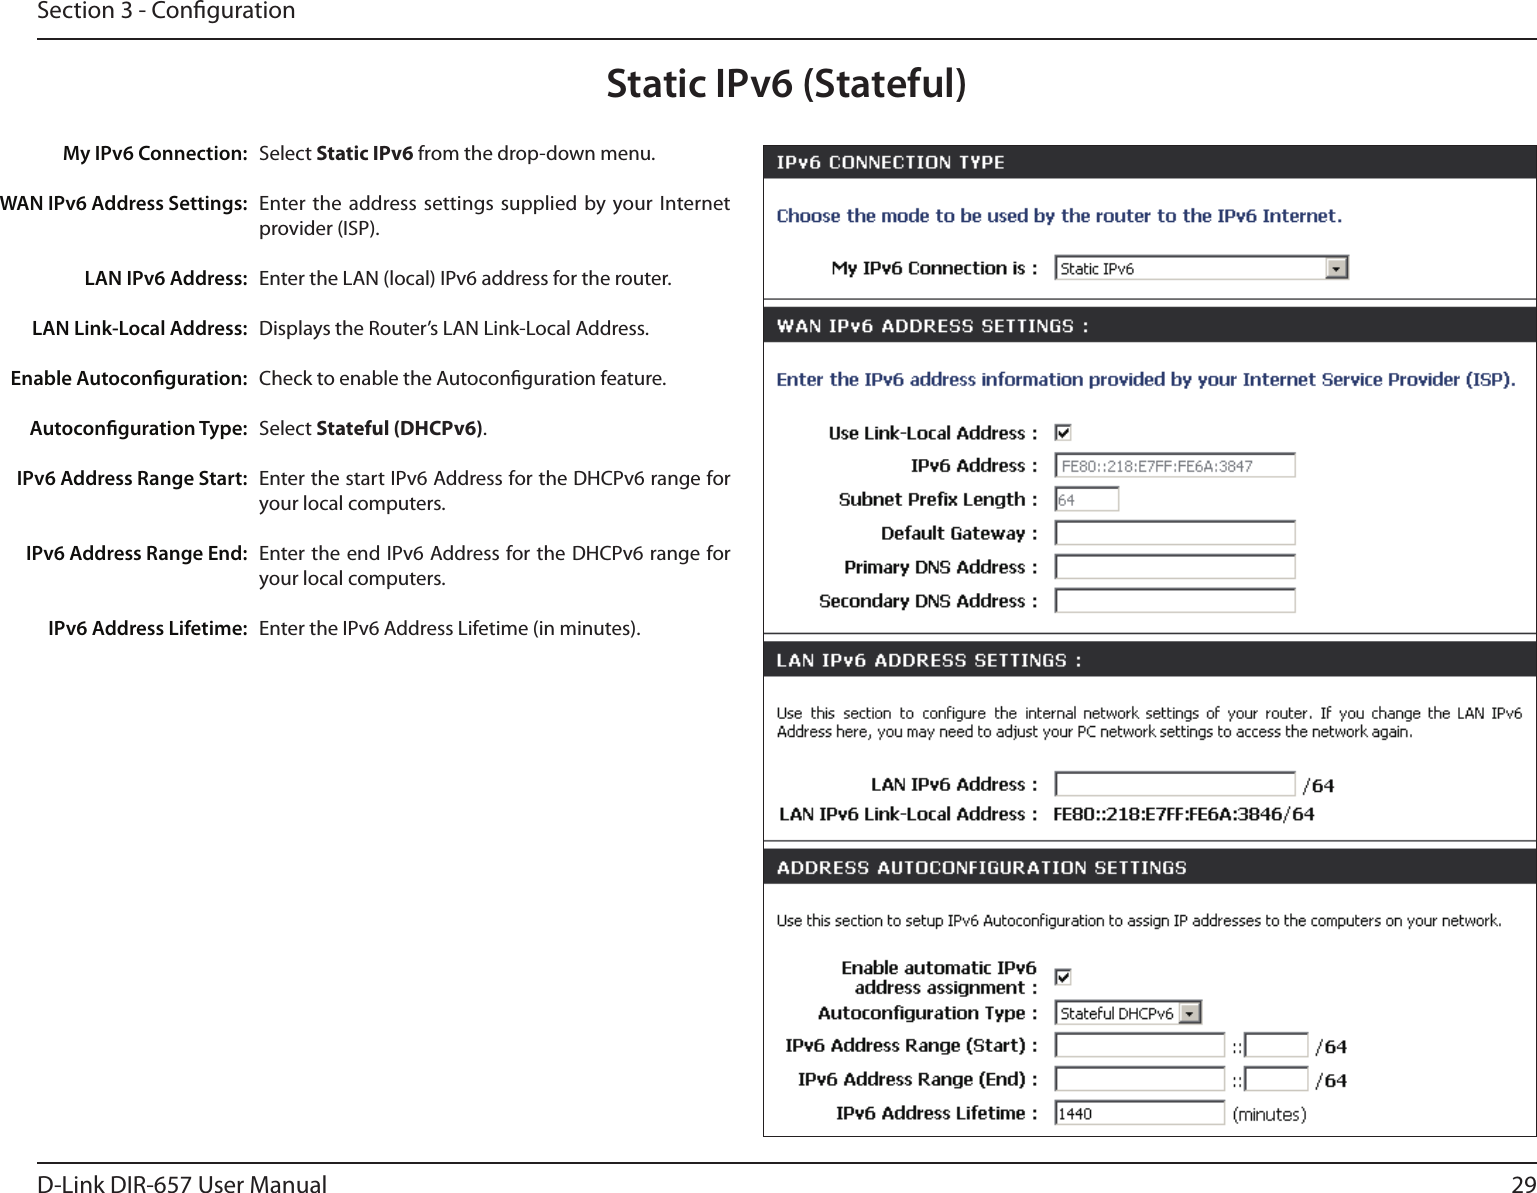 29D-Link DIR-657 User ManualSection 3 - CongurationStatic IPv6 (Stateful)Select Static IPv6 from the drop-down menu.Enter the  address settings supplied  by your Internet provider (ISP). Enter the LAN (local) IPv6 address for the router. Displays the Router’s LAN Link-Local Address.Check to enable the Autoconguration feature.Select Stateful (DHCPv6).Enter the start IPv6 Address for the DHCPv6 range for your local computers.Enter the end IPv6 Address for the  DHCPv6 range for your local computers.Enter the IPv6 Address Lifetime (in minutes).My IPv6 Connection:WAN IPv6 Address Settings:LAN IPv6 Address:LAN Link-Local Address:Enable Autoconguration:Autoconguration Type:IPv6 Address Range Start:IPv6 Address Range End:IPv6 Address Lifetime: